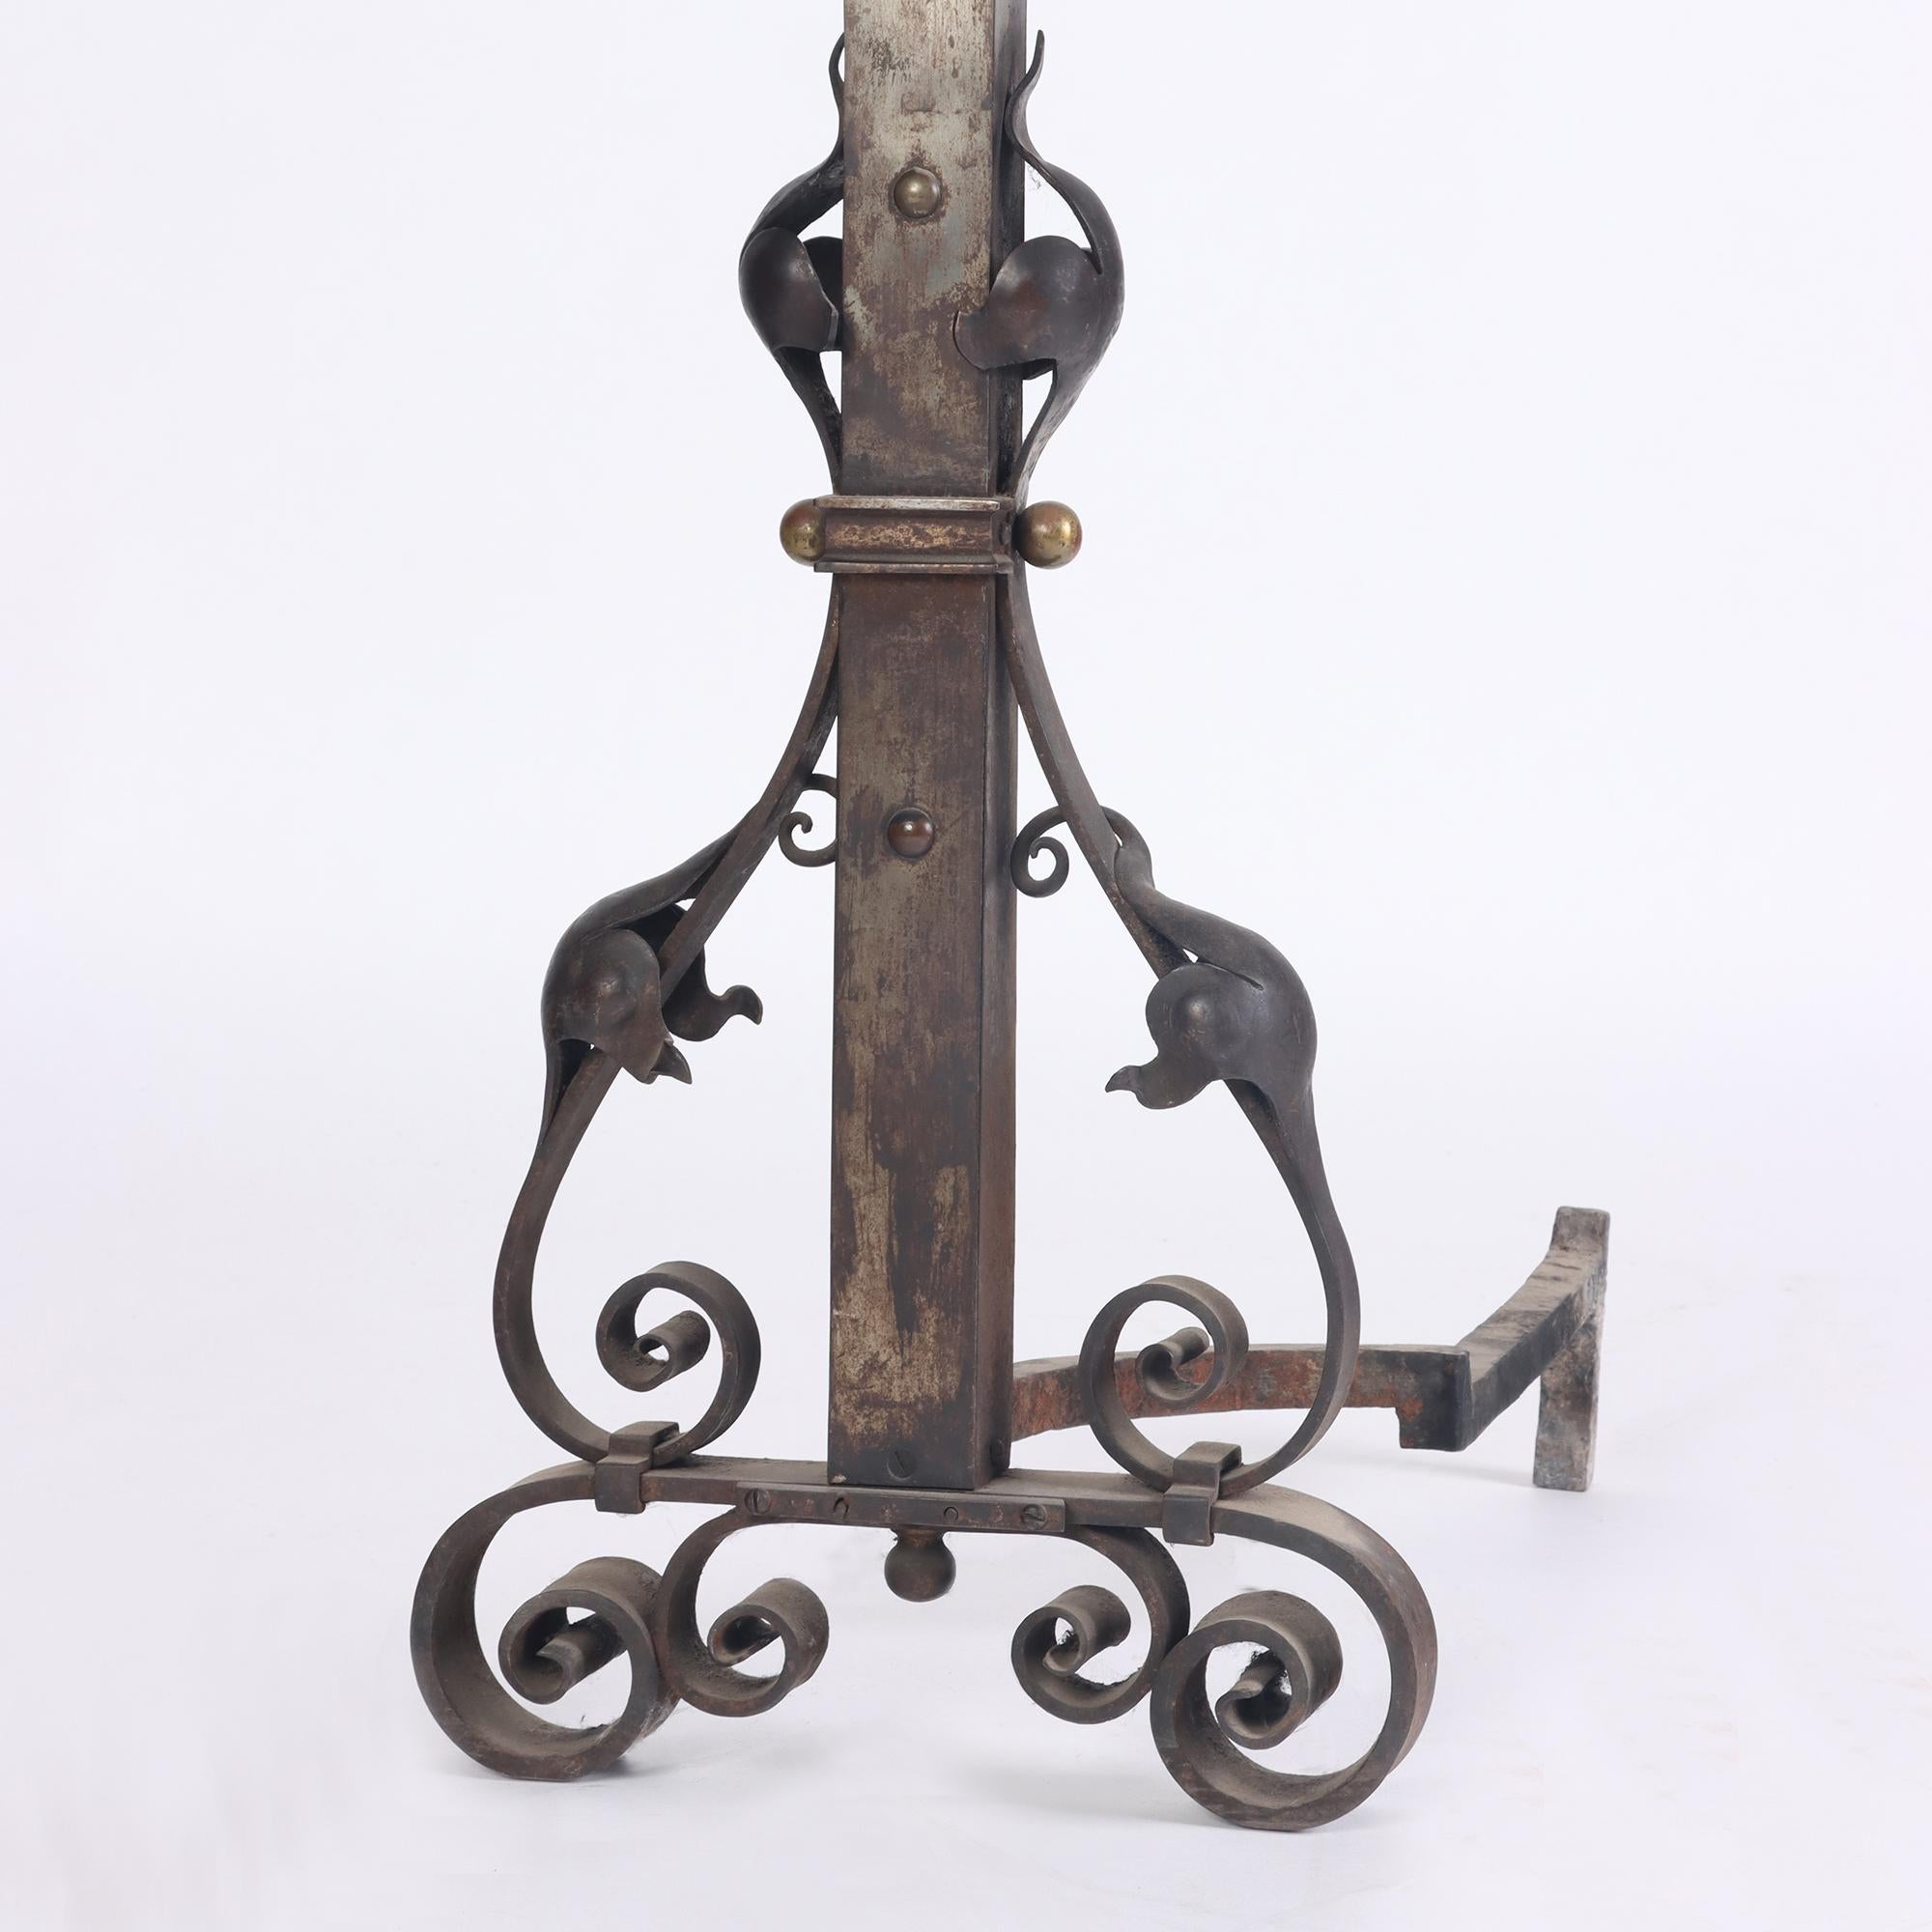 Substantial and Monumental Pair of Nineteenth Century French Wrought Iron and For Sale 3